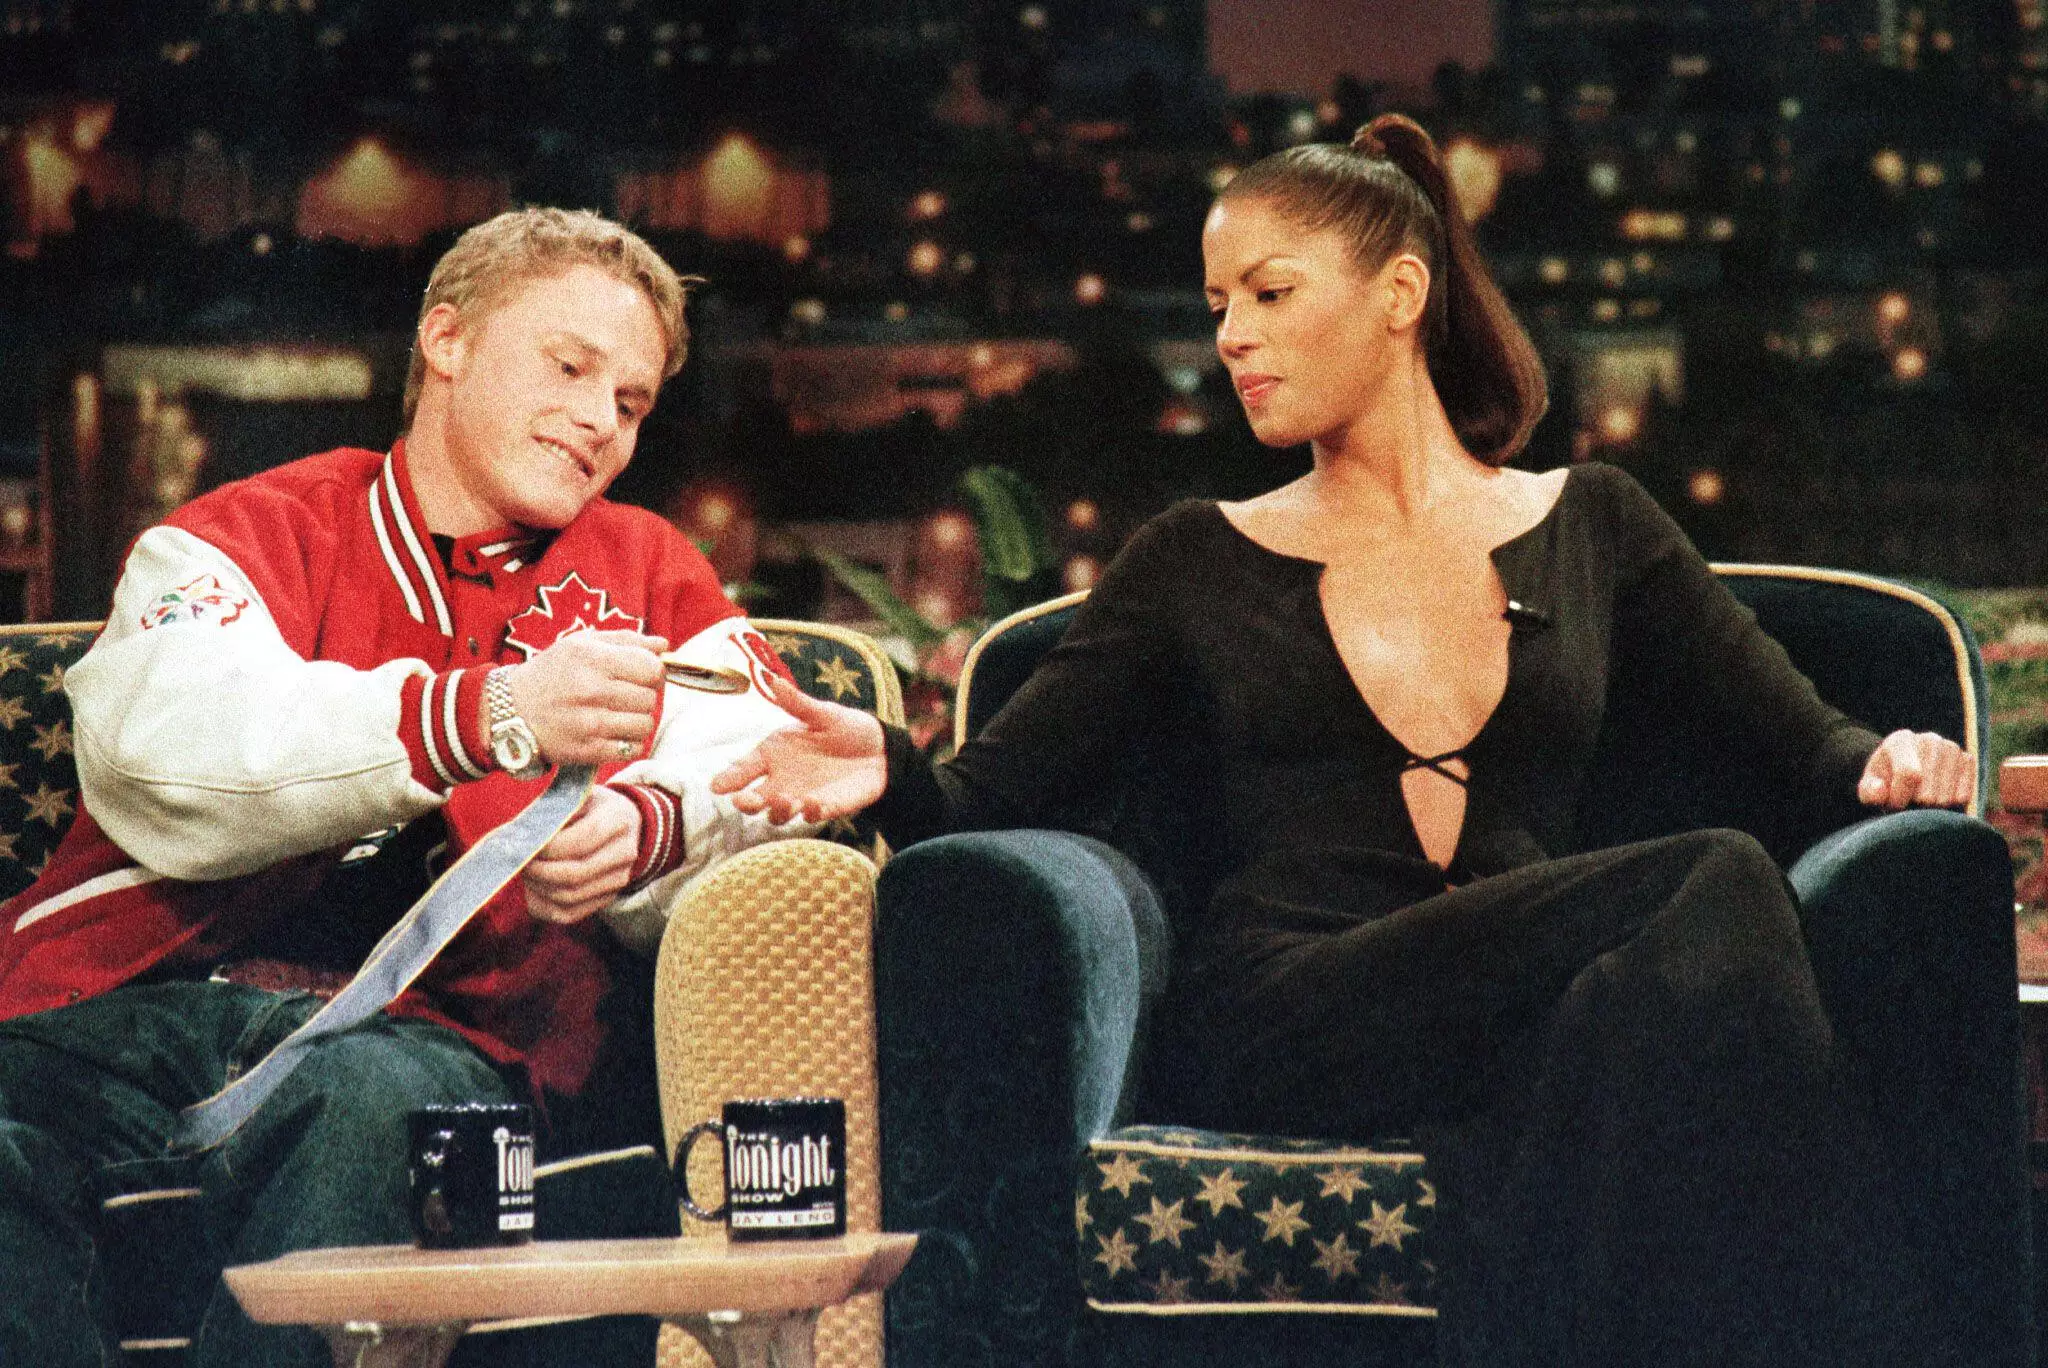 Ross Rebagliati shows his medal to supermodel Veronica Webb on a TV show.